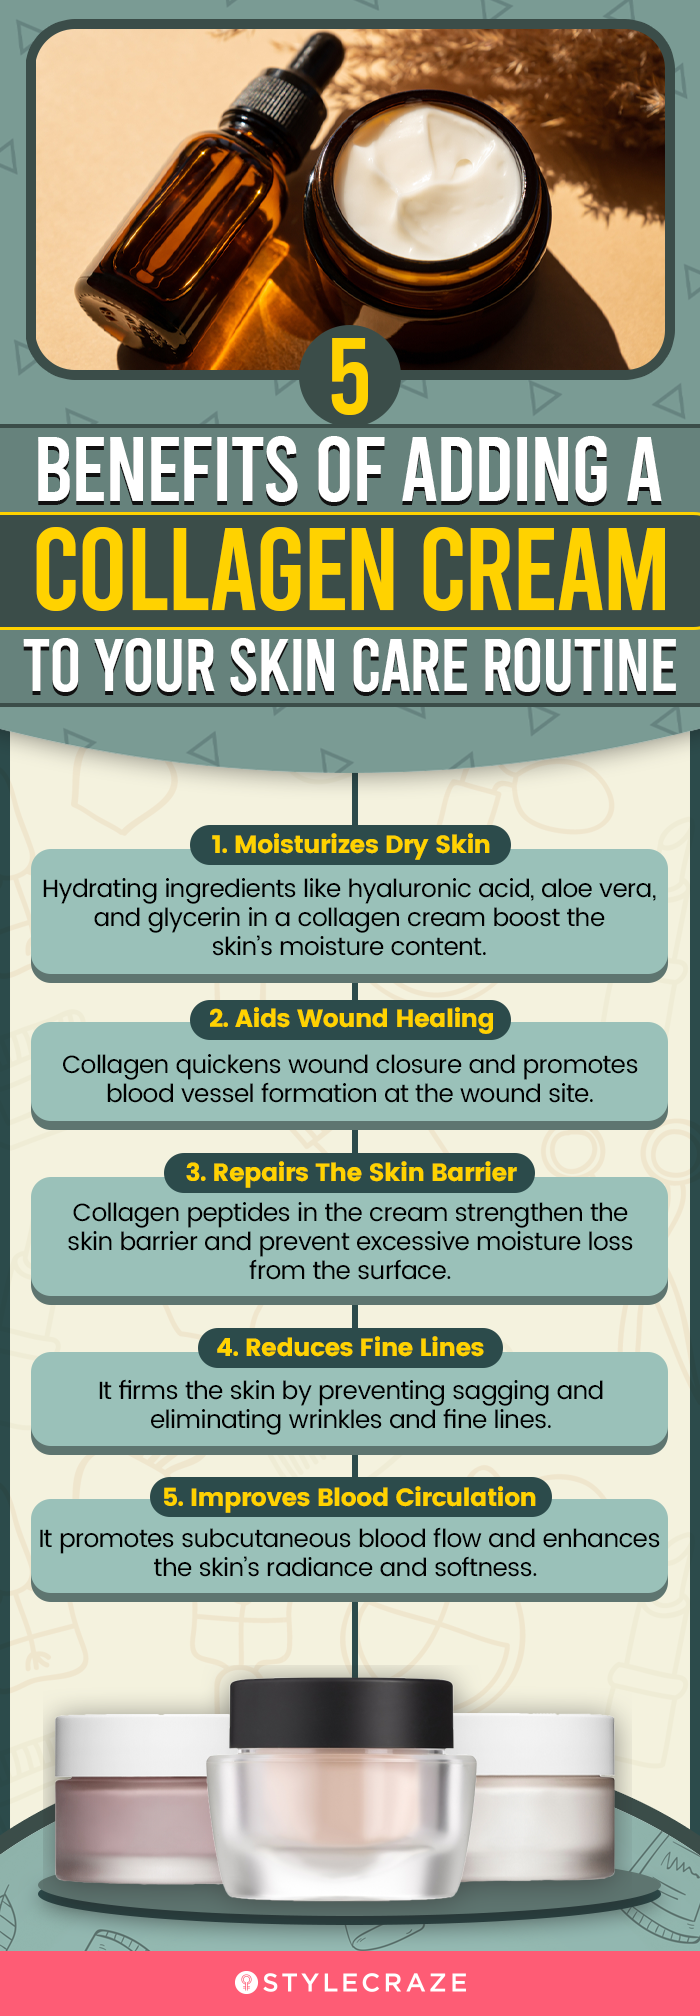 5 Benefits Of Adding A Collagen Cream To Your Skin Care (infographic)